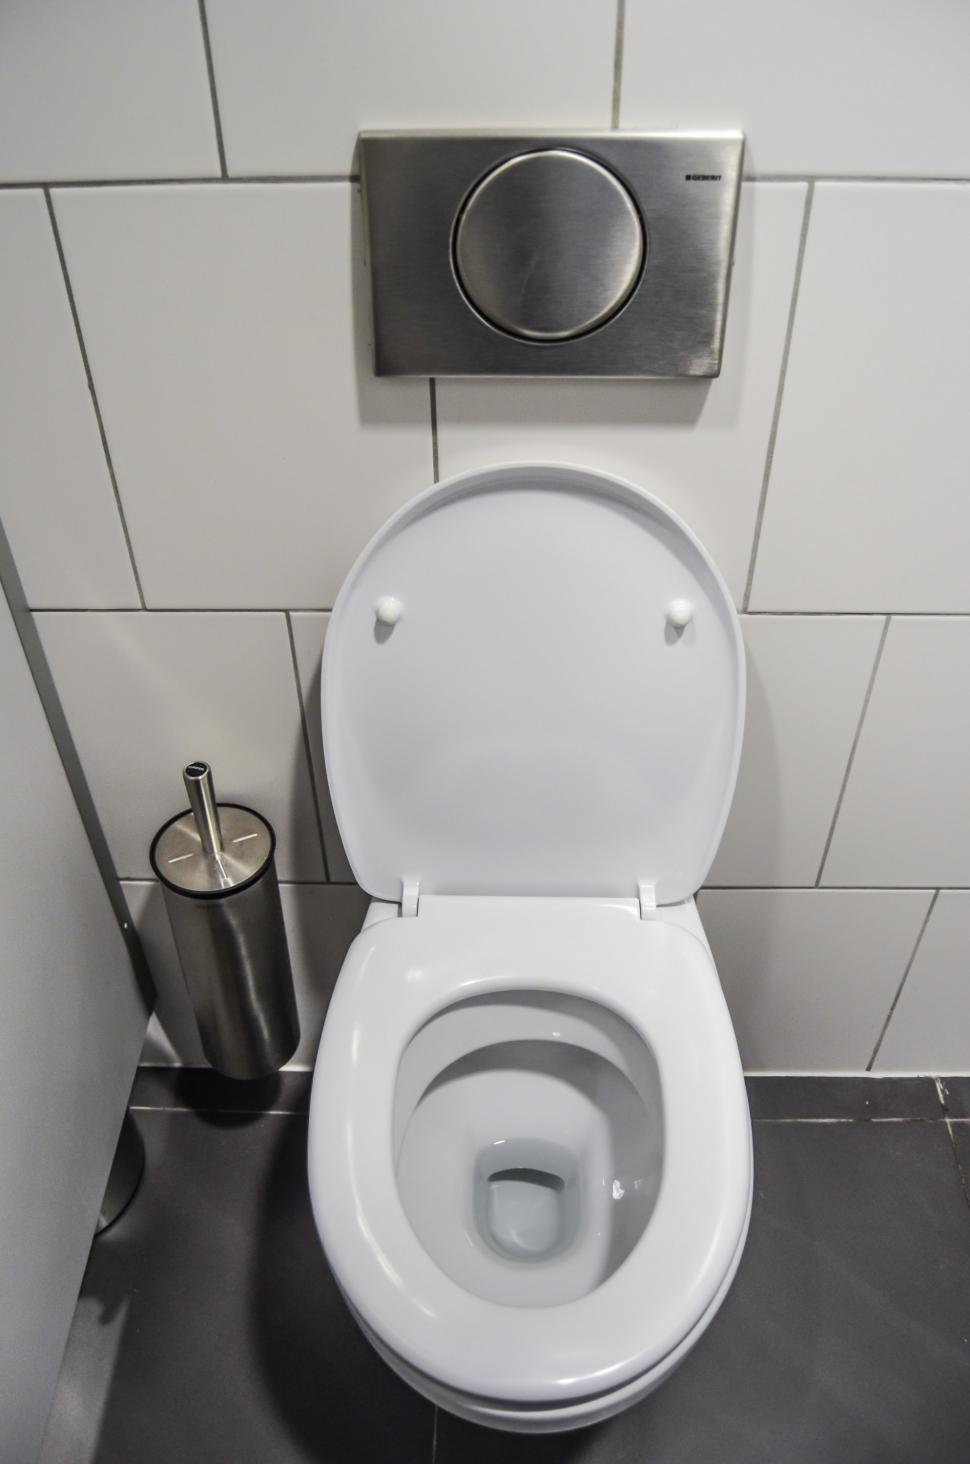 Free Image of White Toilet Next to Trash Can in Bathroom 